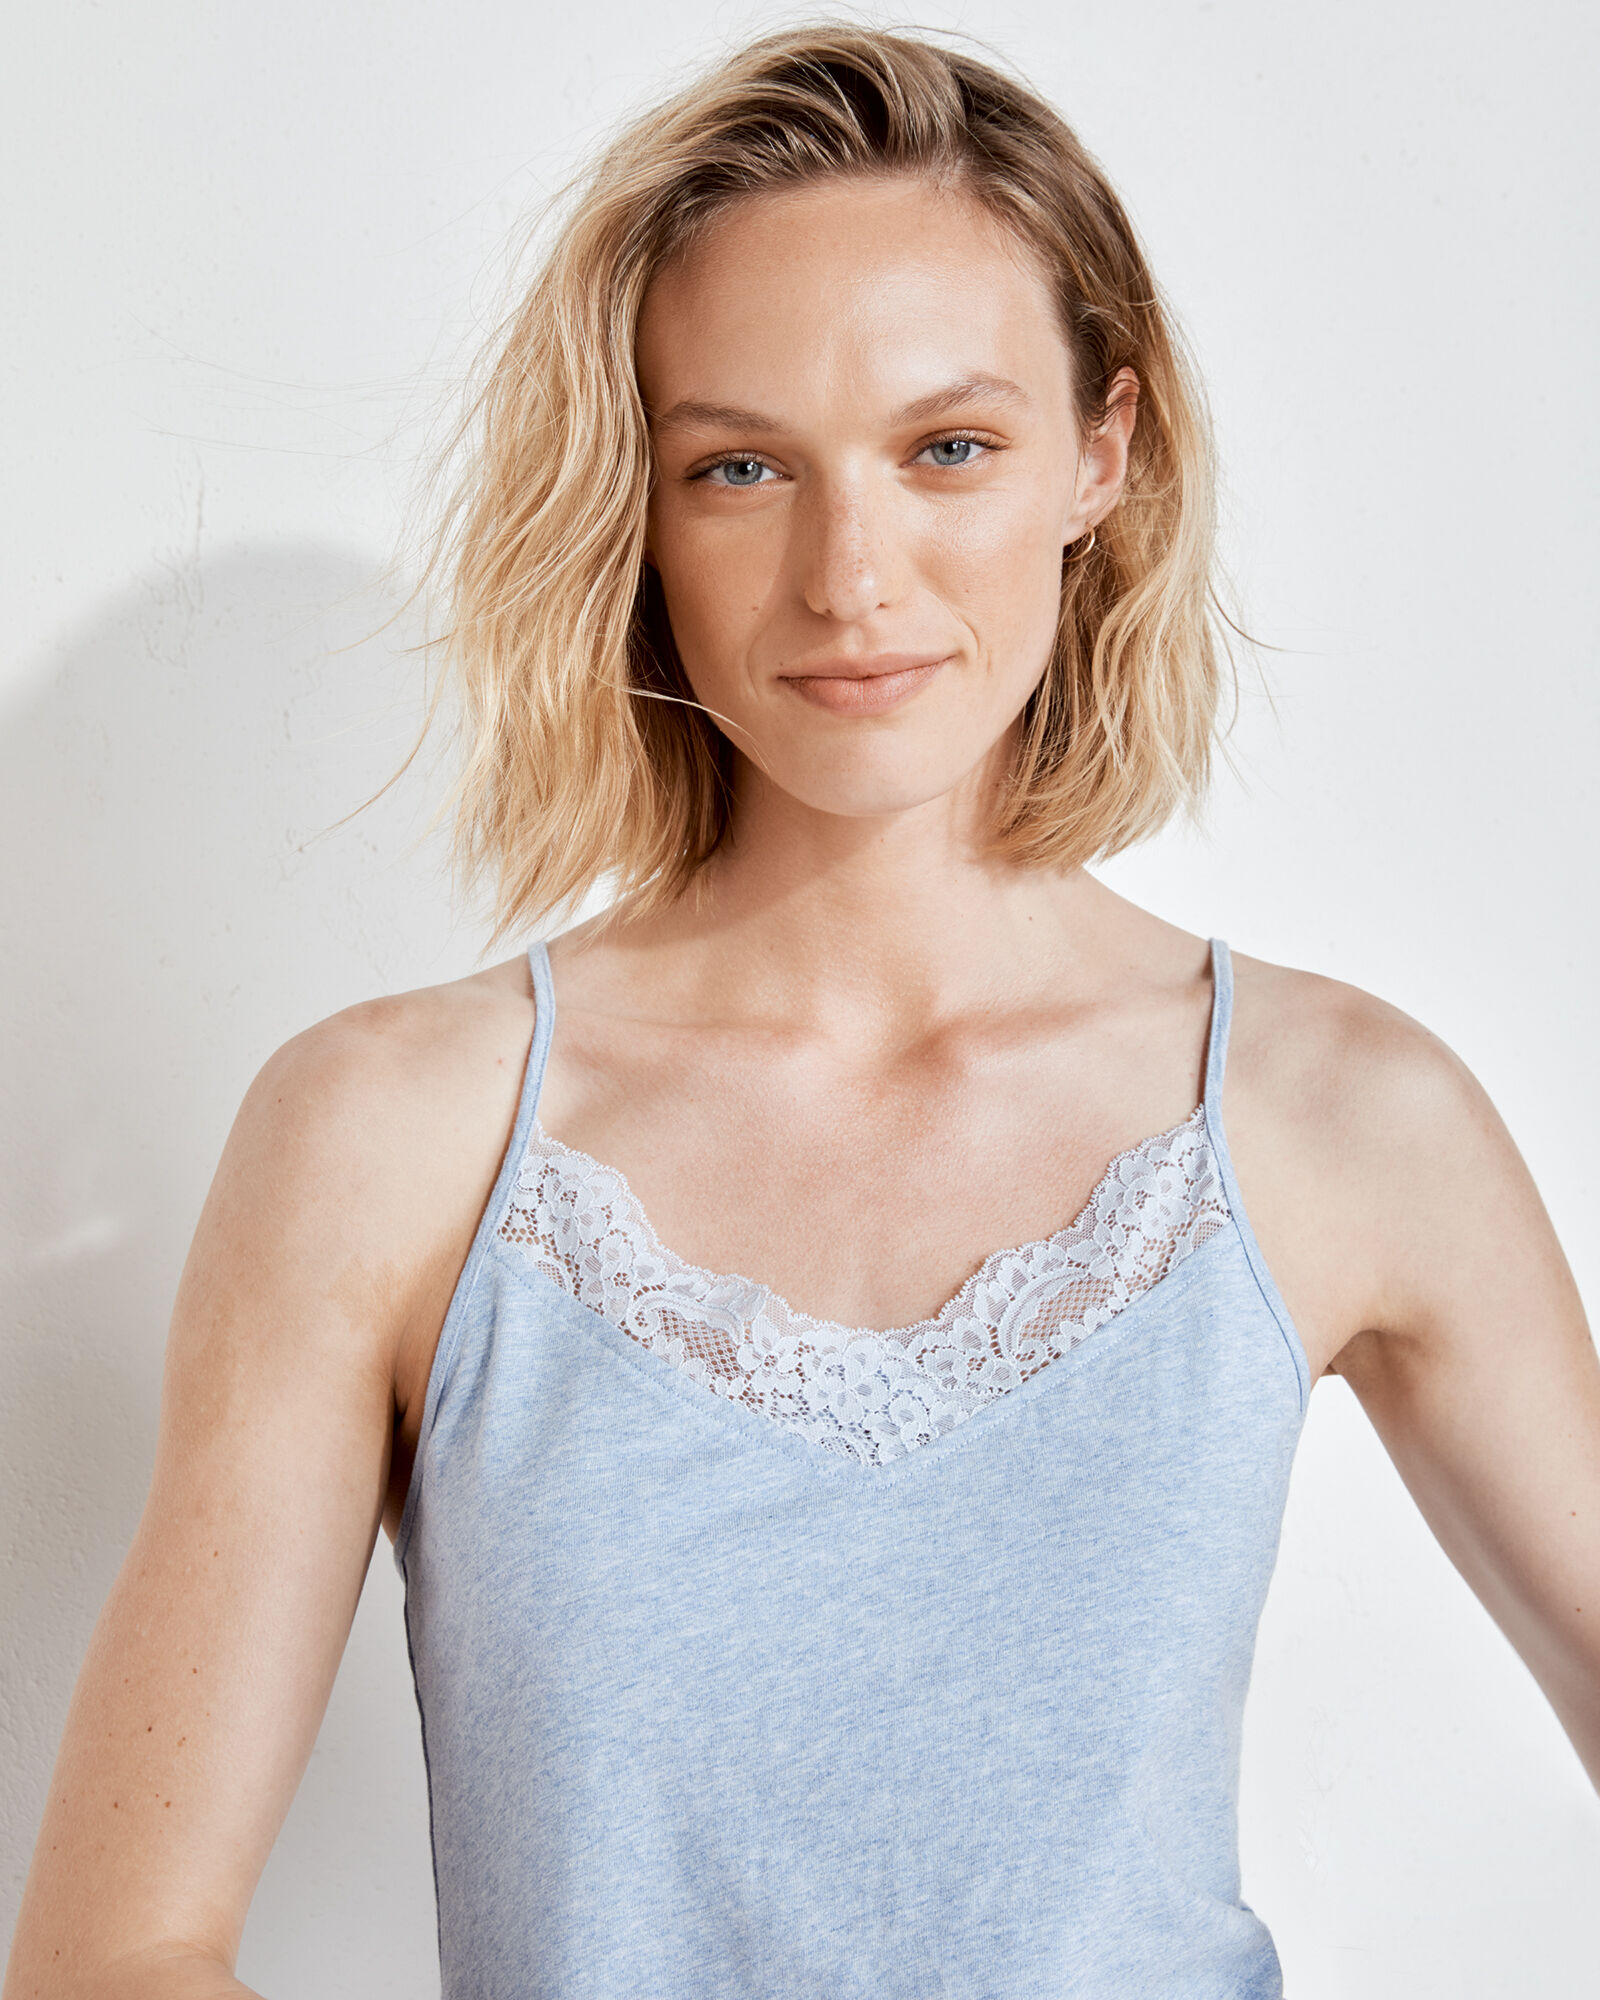 Tank with Built-in Bra,2-in-1 Camisoles,Women's Organic Cotton